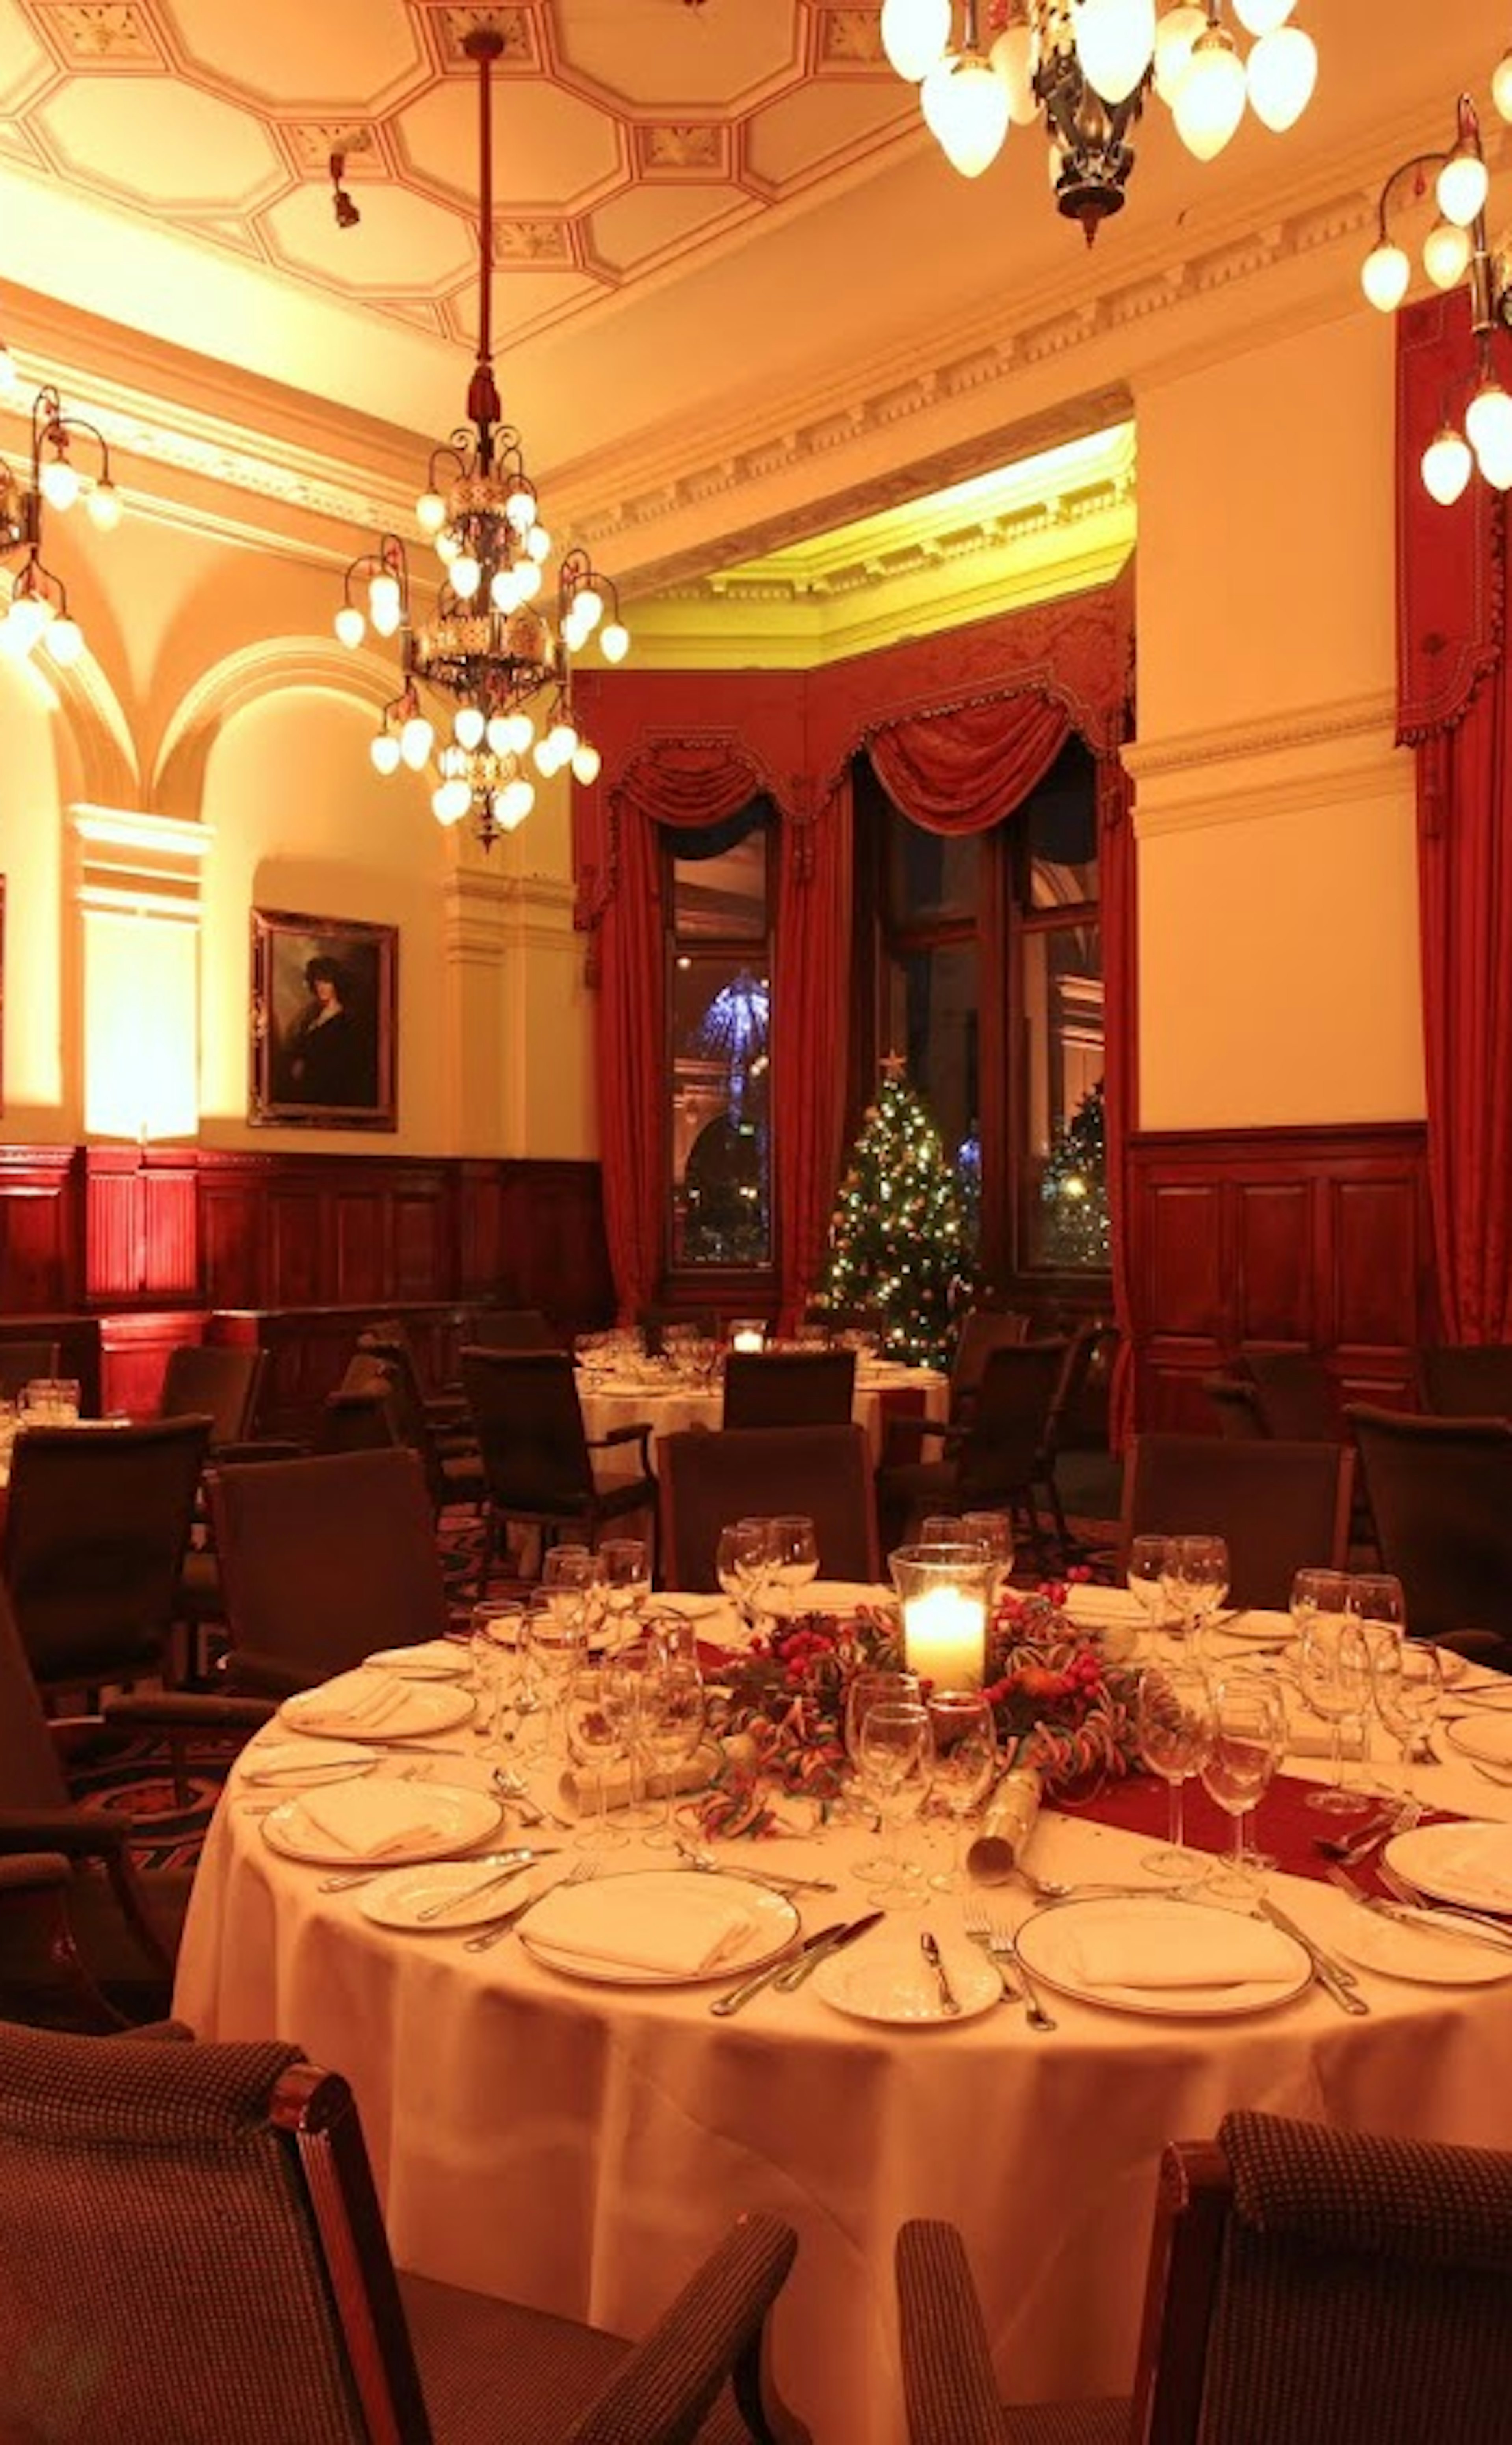 Award Ceremony Venues - The Royal Horseguards Hotel and One Whitehall Place